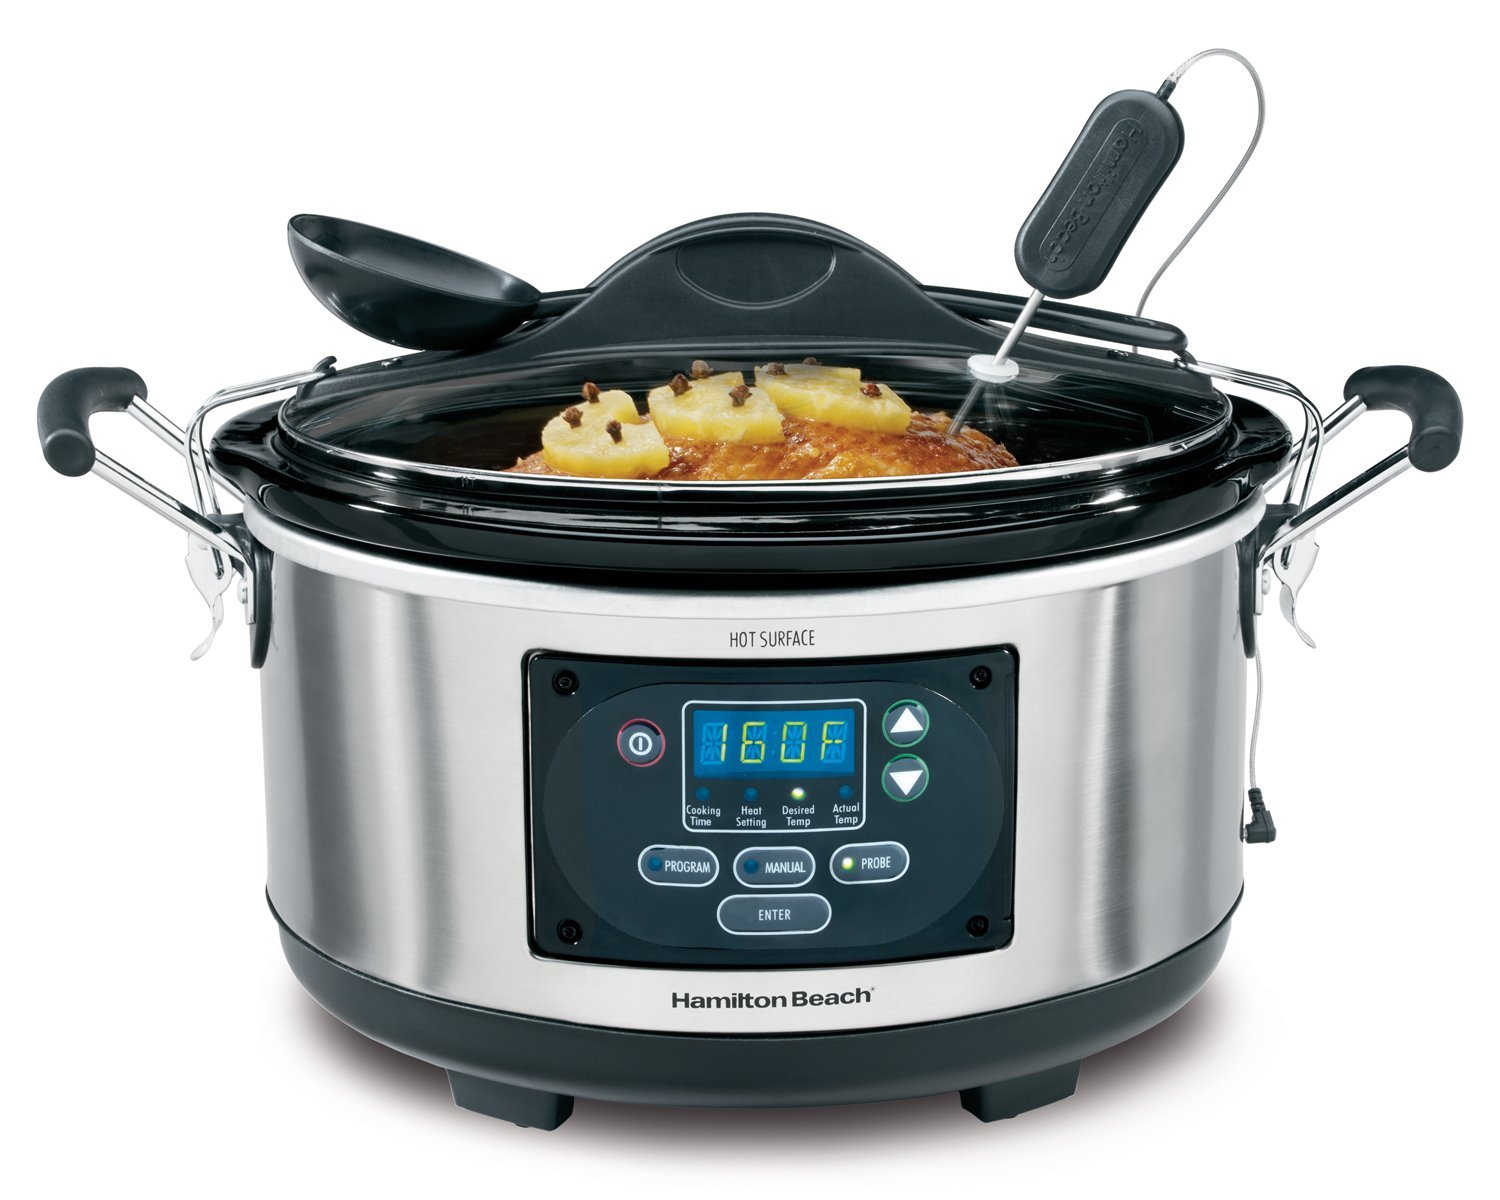 Hamilton Beach Set ‘n Forget Programmable Slow Cooker – Just $39.99!